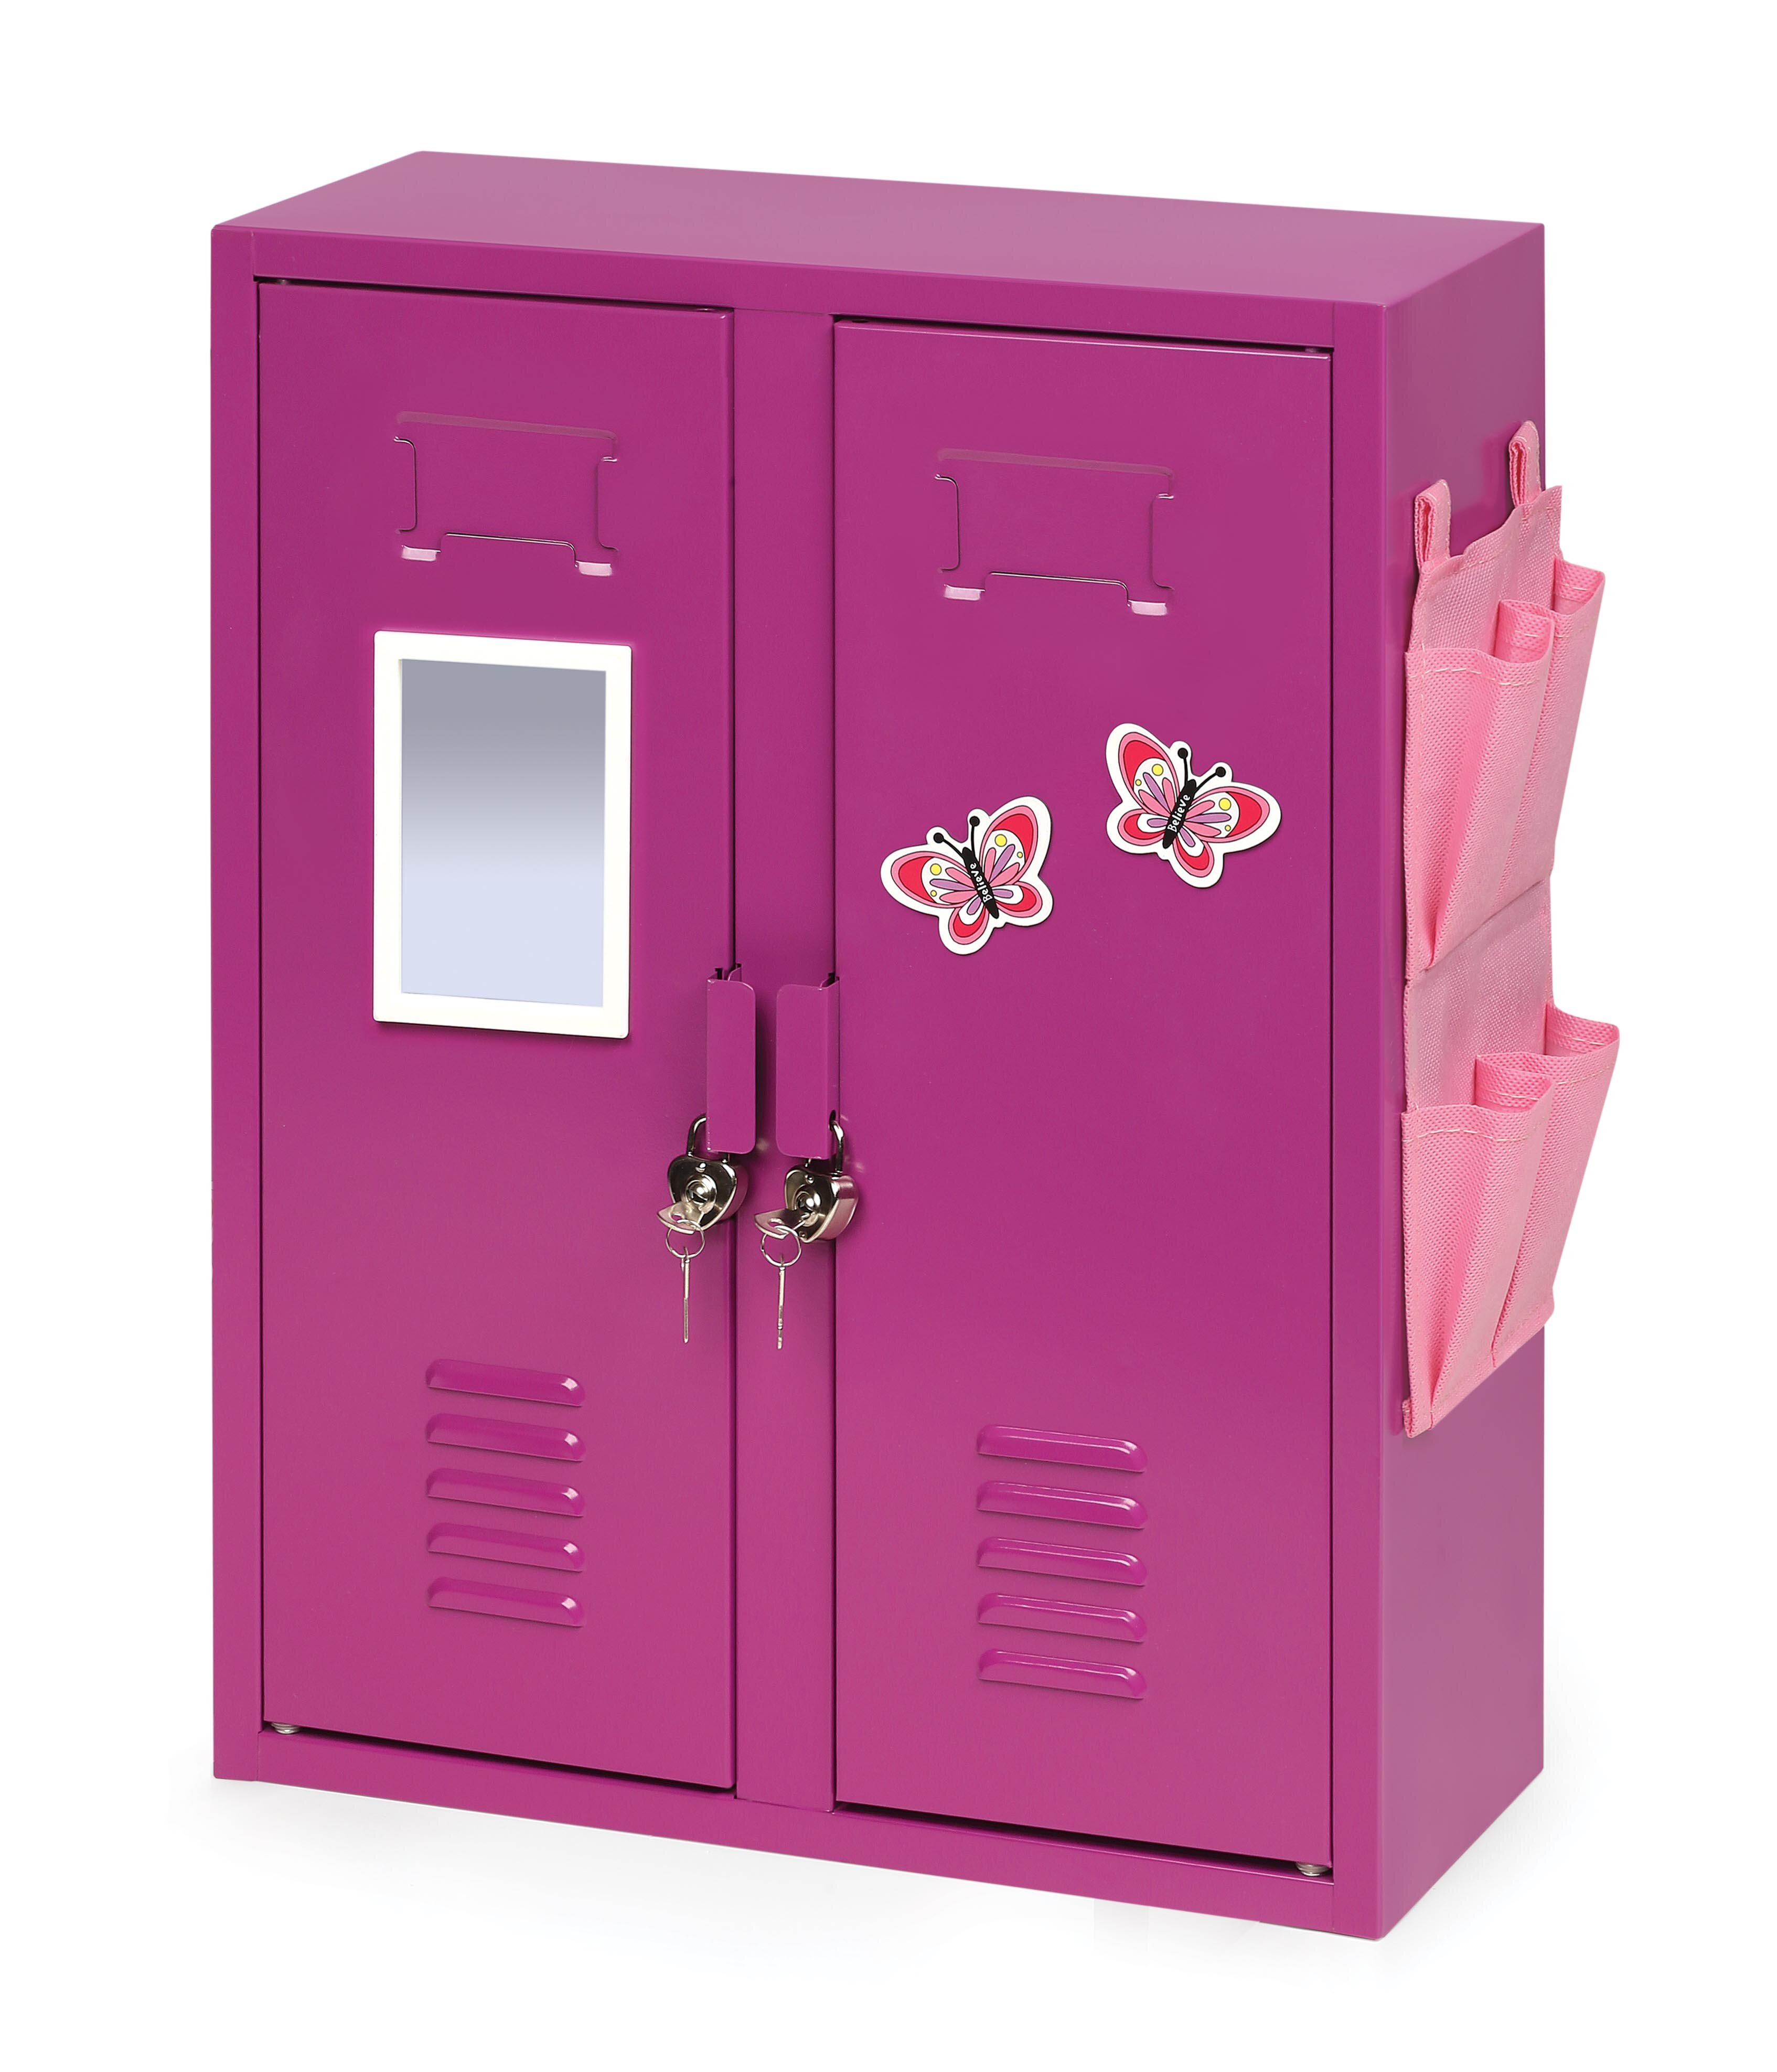 Locker Lounge Magnetic STORAGE CUP WITH DIVIDER PINK  FOR SCHOOL LOCKER NEW 